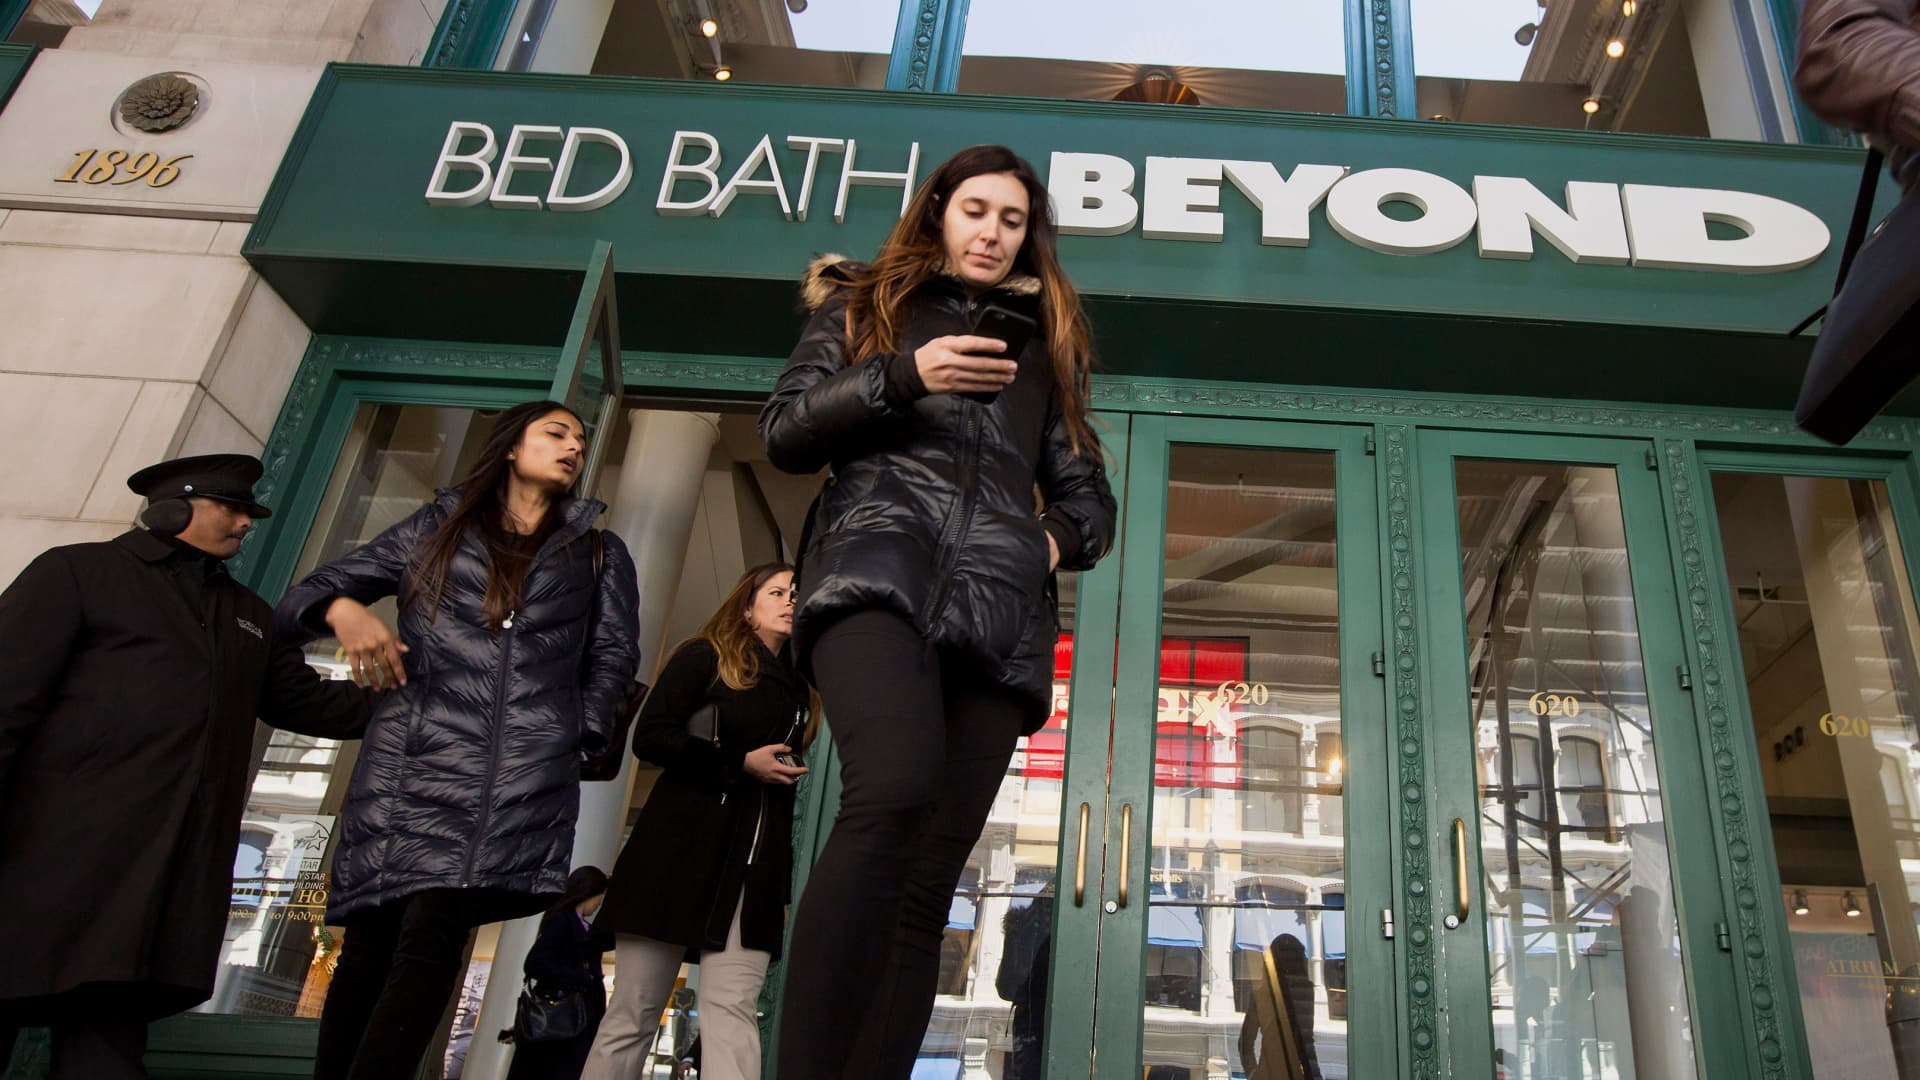 Shoppers exit a Bed Bath & Beyond store in New York.